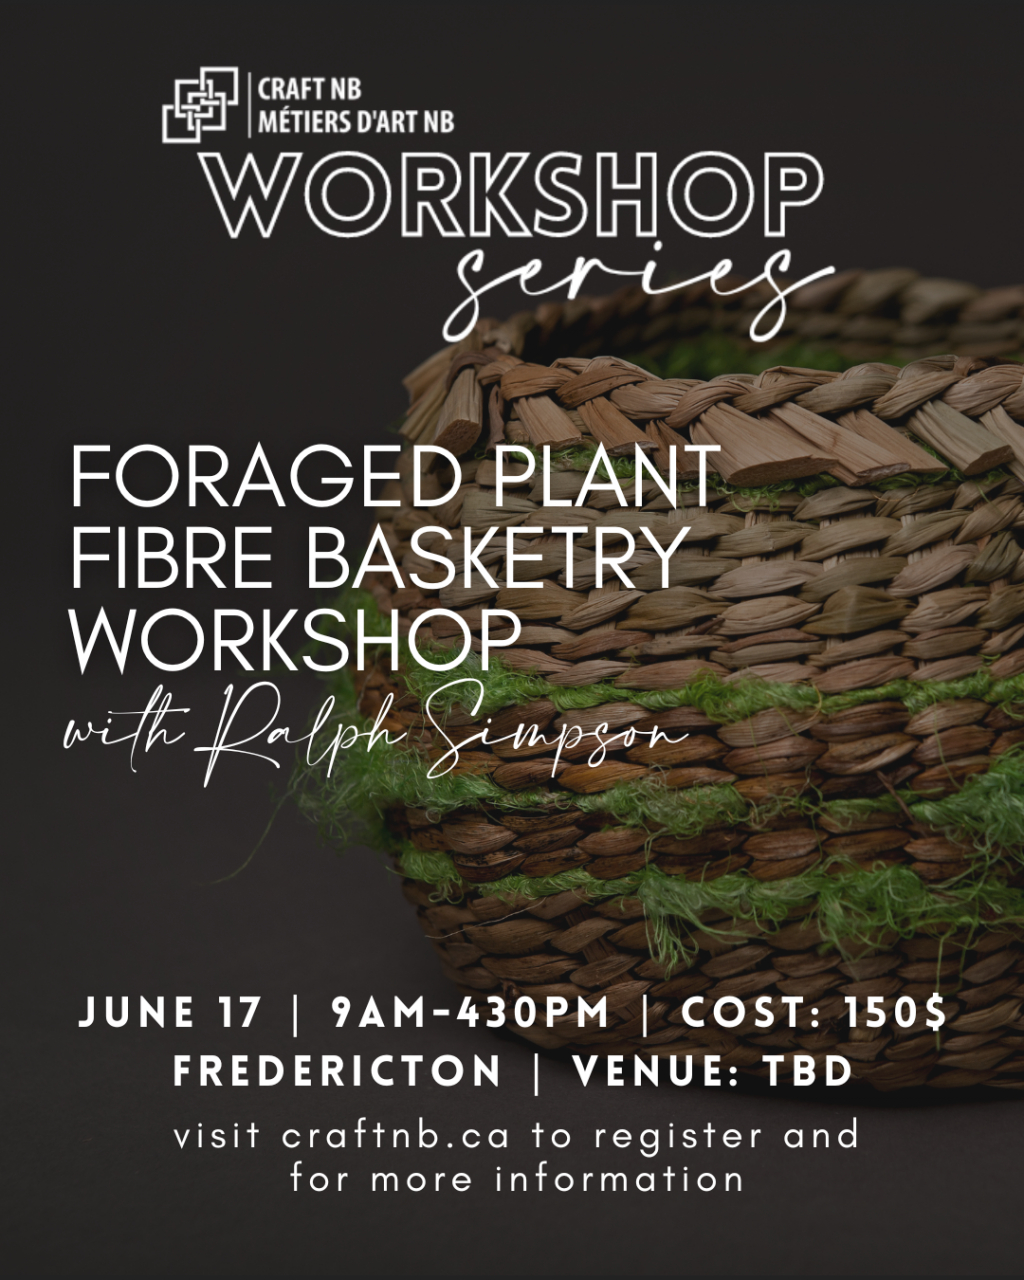 Text says: Craft NB Workshop Series: Foraged Plant Fibre Basketry Workshop with Ralph Simpson